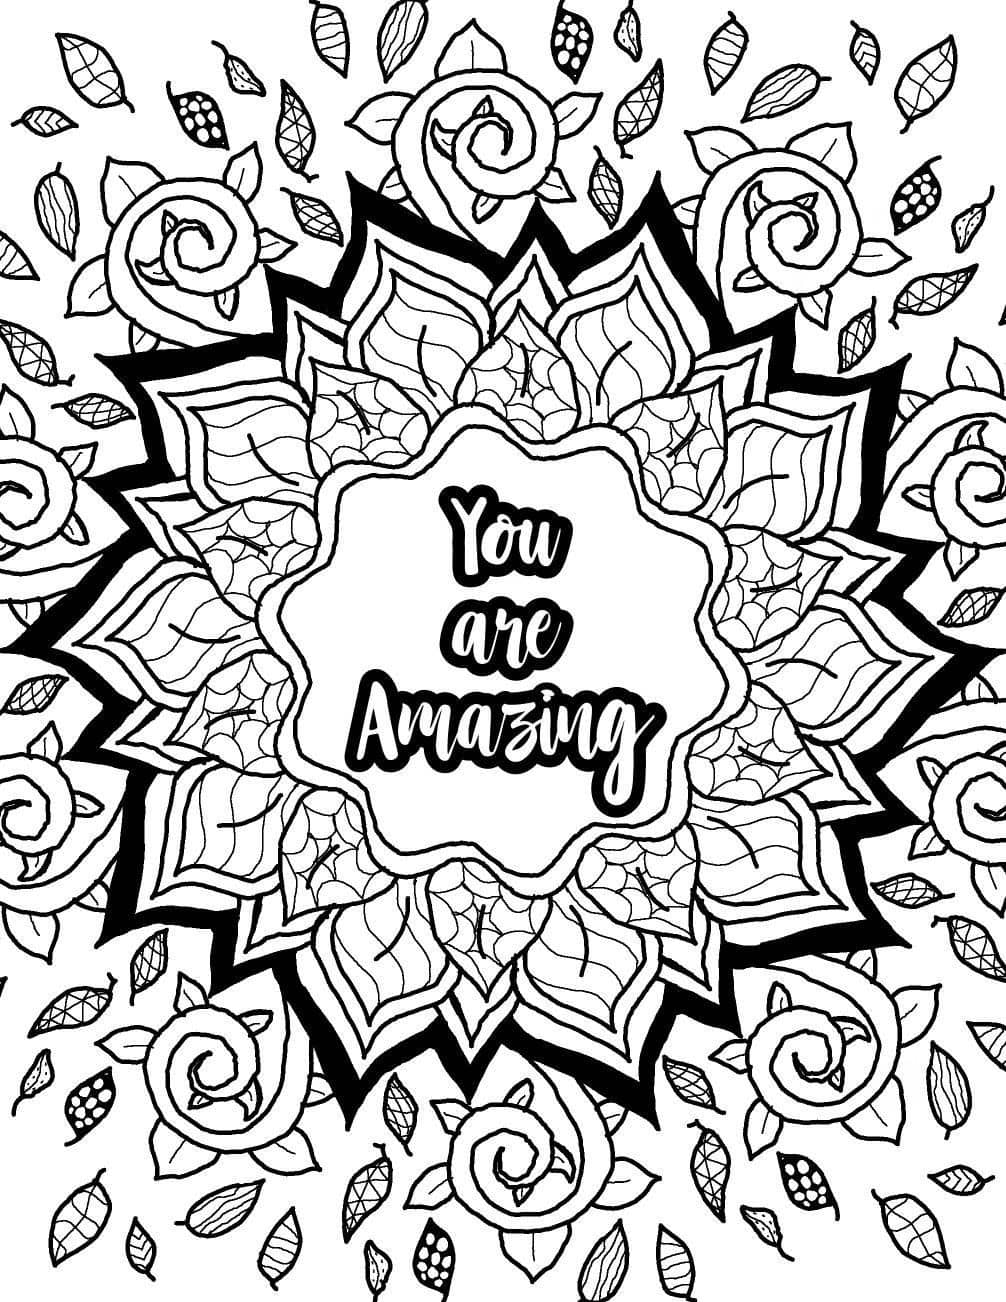 20 Free Inspirational Coloring Pages for Adults   Happier Human